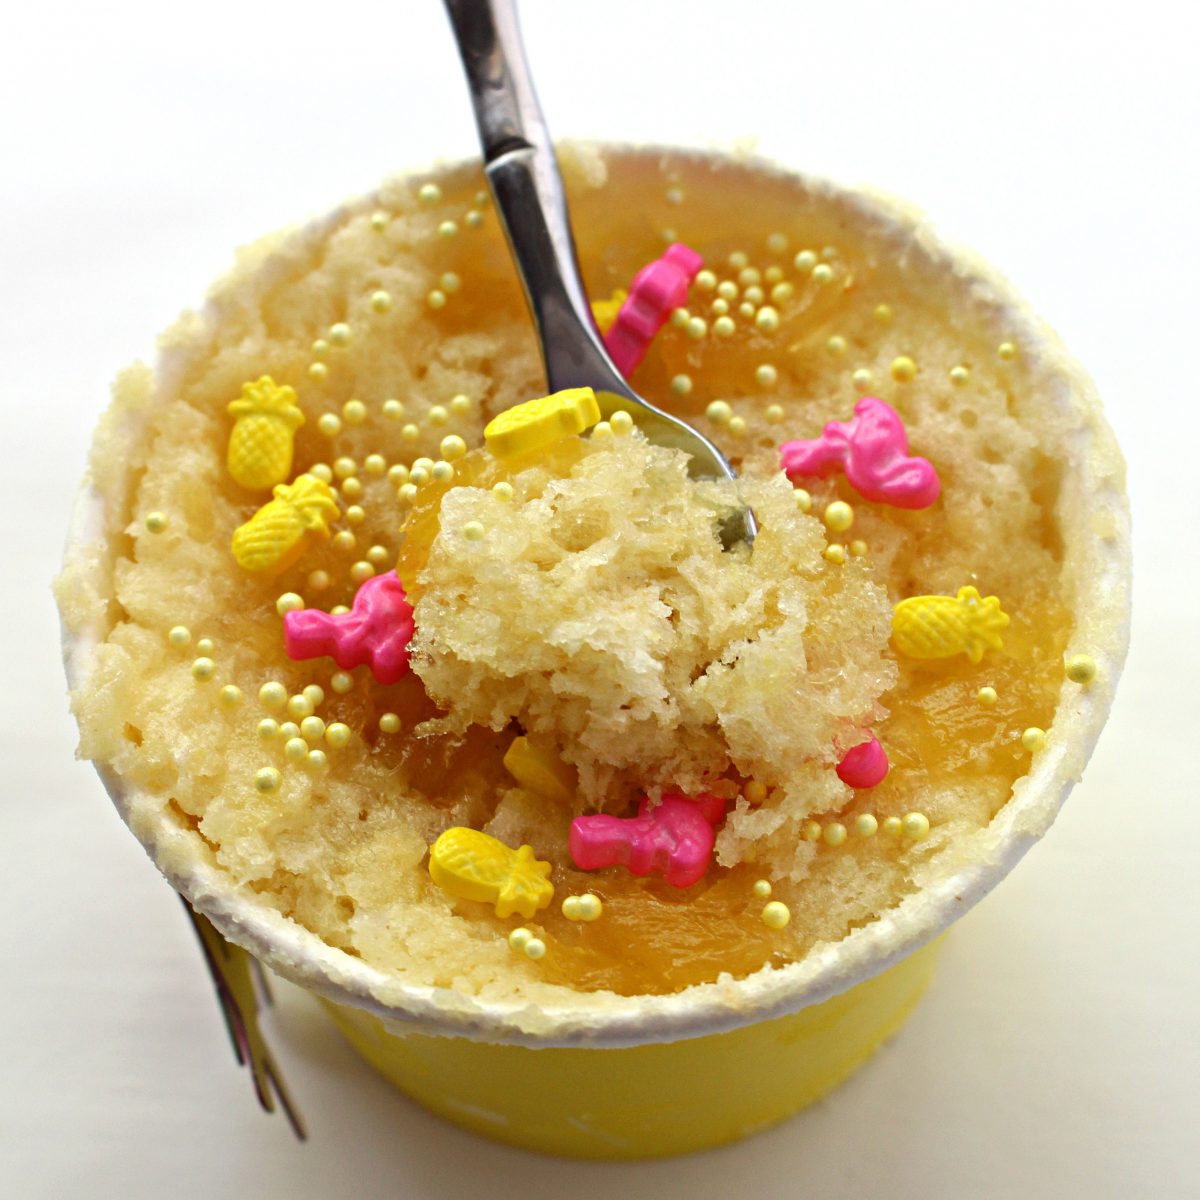 A spoon scooping pineapple mug cake out of a paper snack cup.